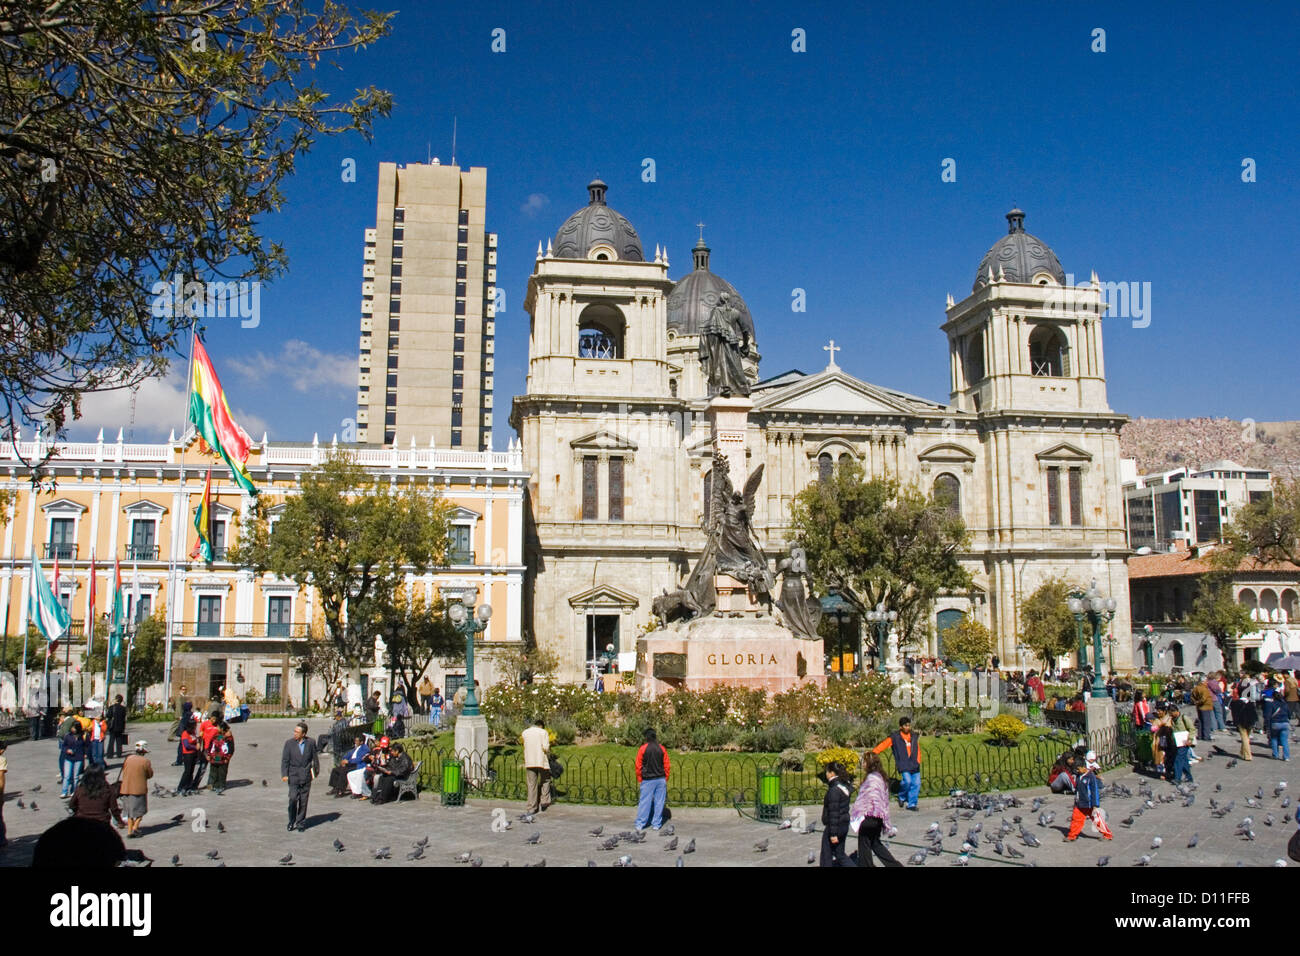 Plaza Murillo,the cathedral, and government palace - Palacio Quemado - in the city of La Paz, Bolivia, South America Stock Photo